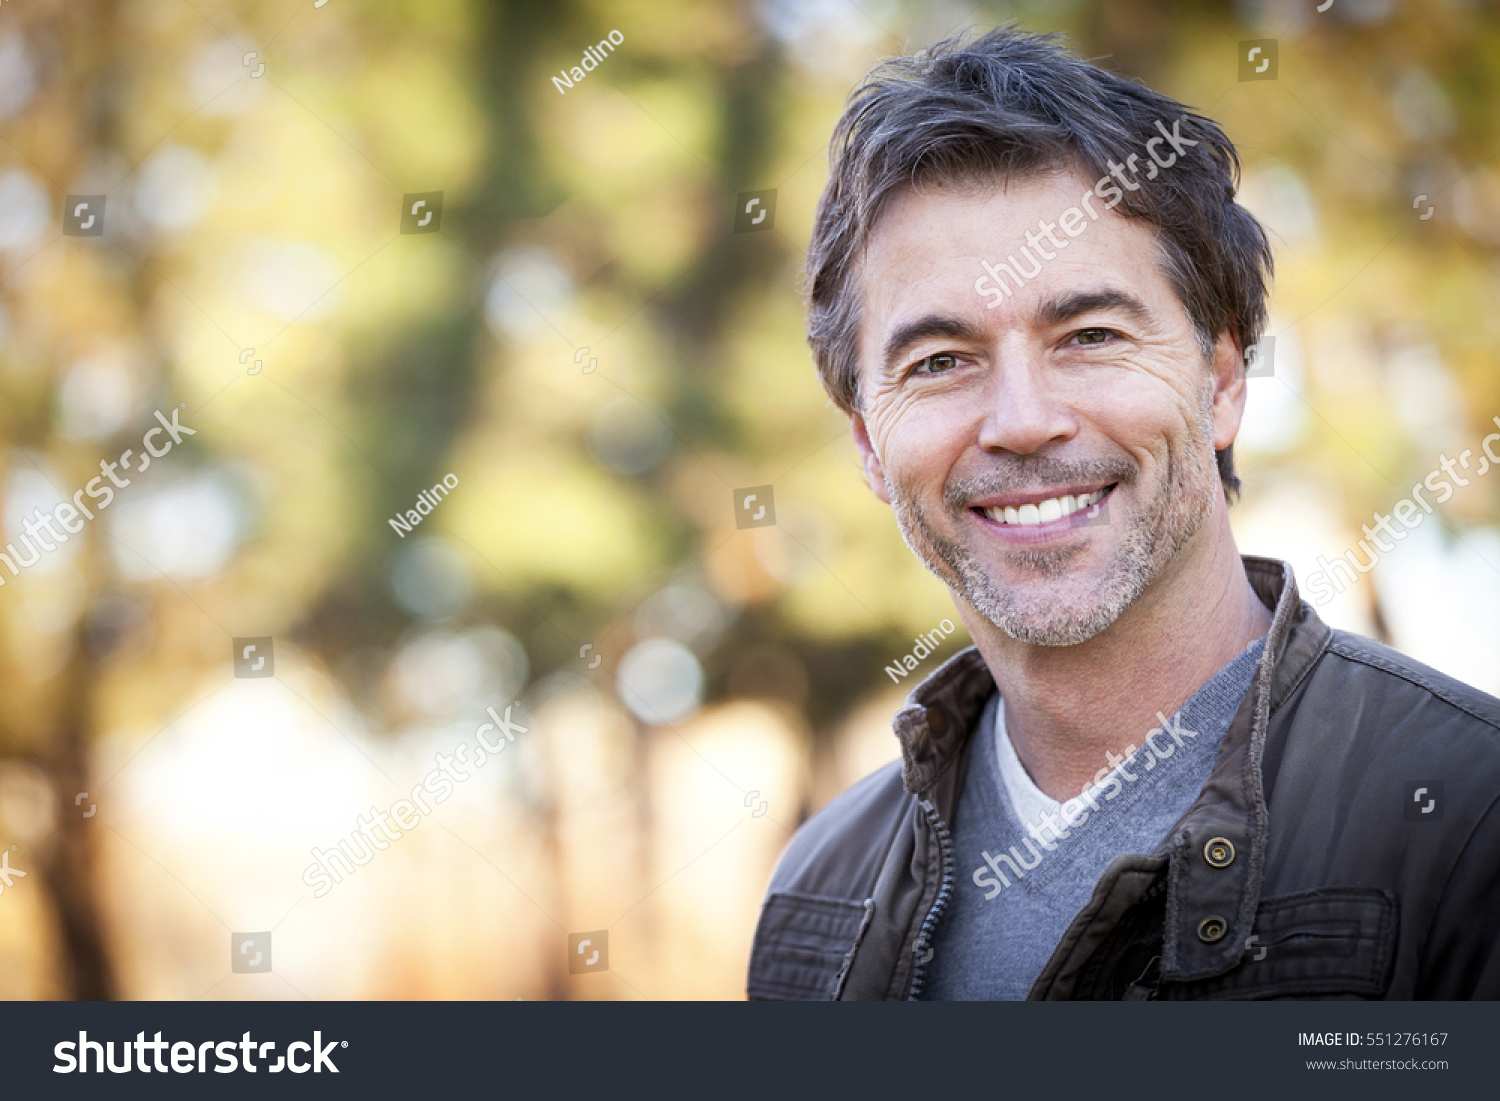 Handsome Mature Happy Man Smiling At The Camera.Outside. #551276167